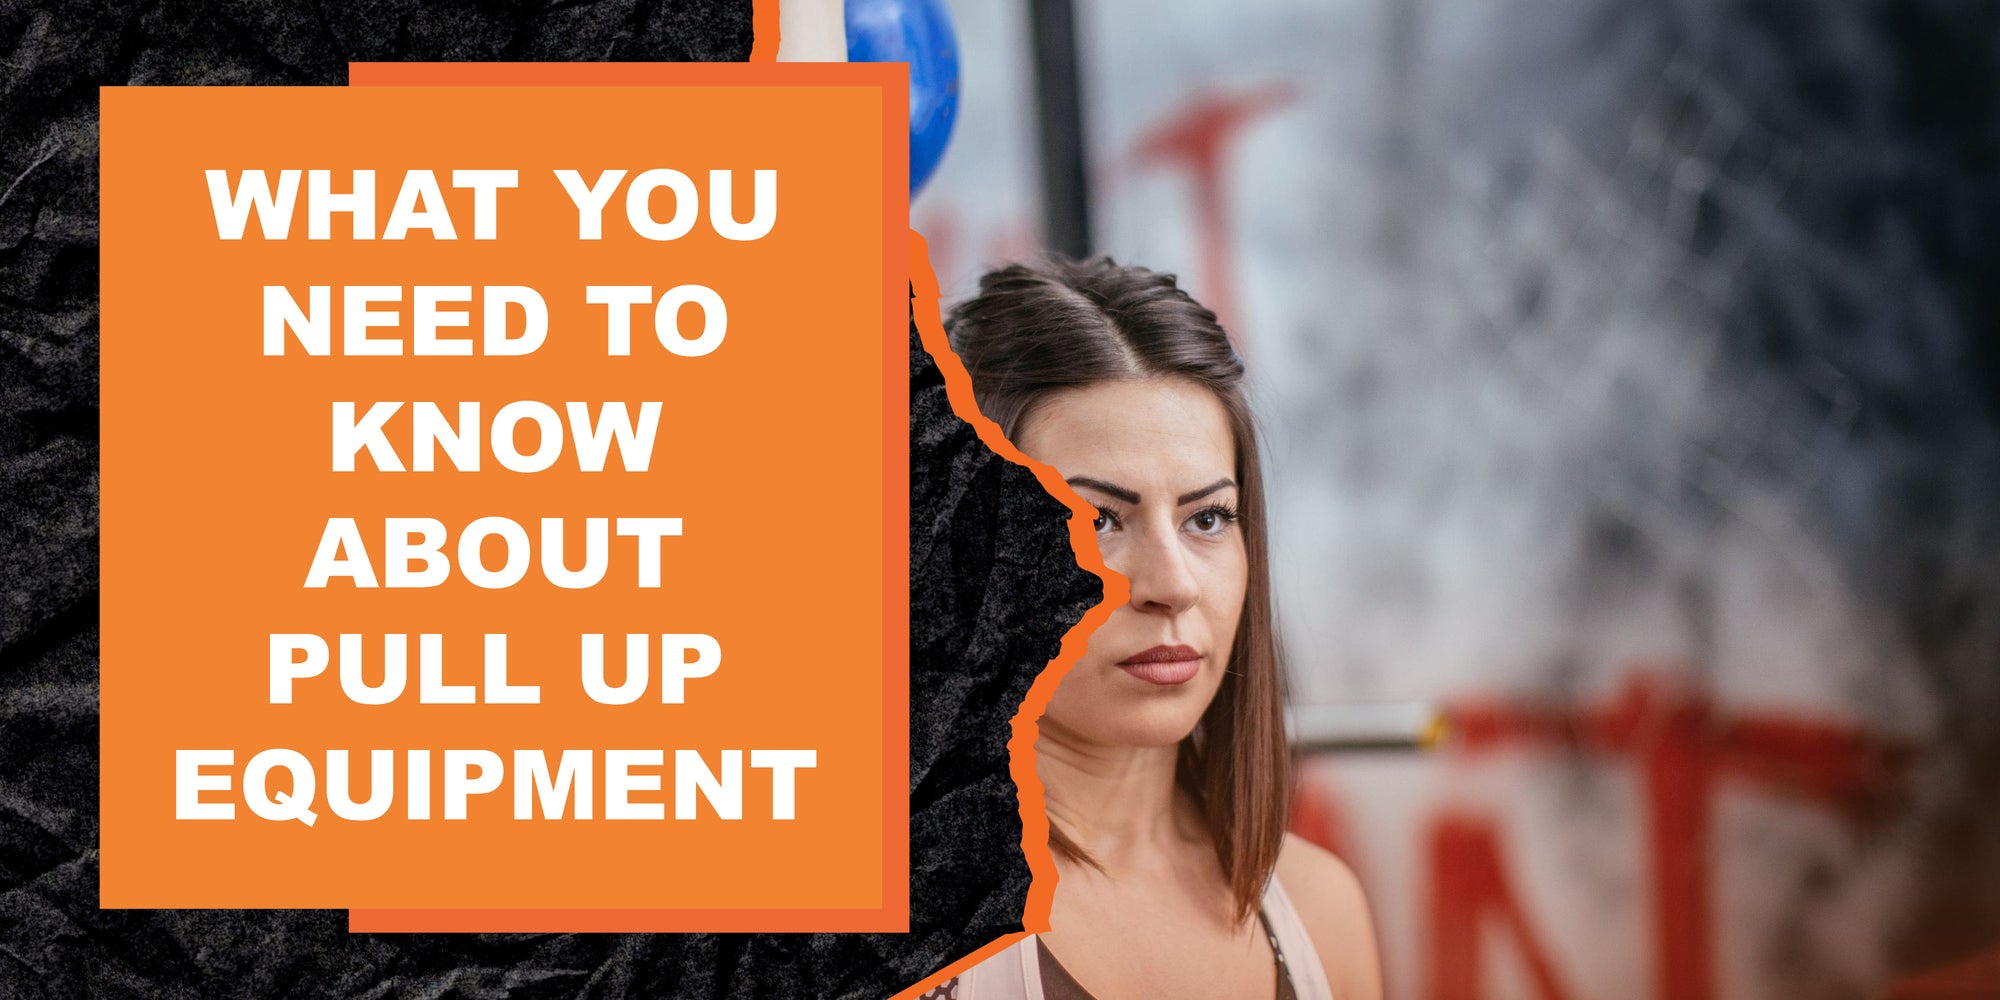 What You Need to Know About Pull Up Equipment